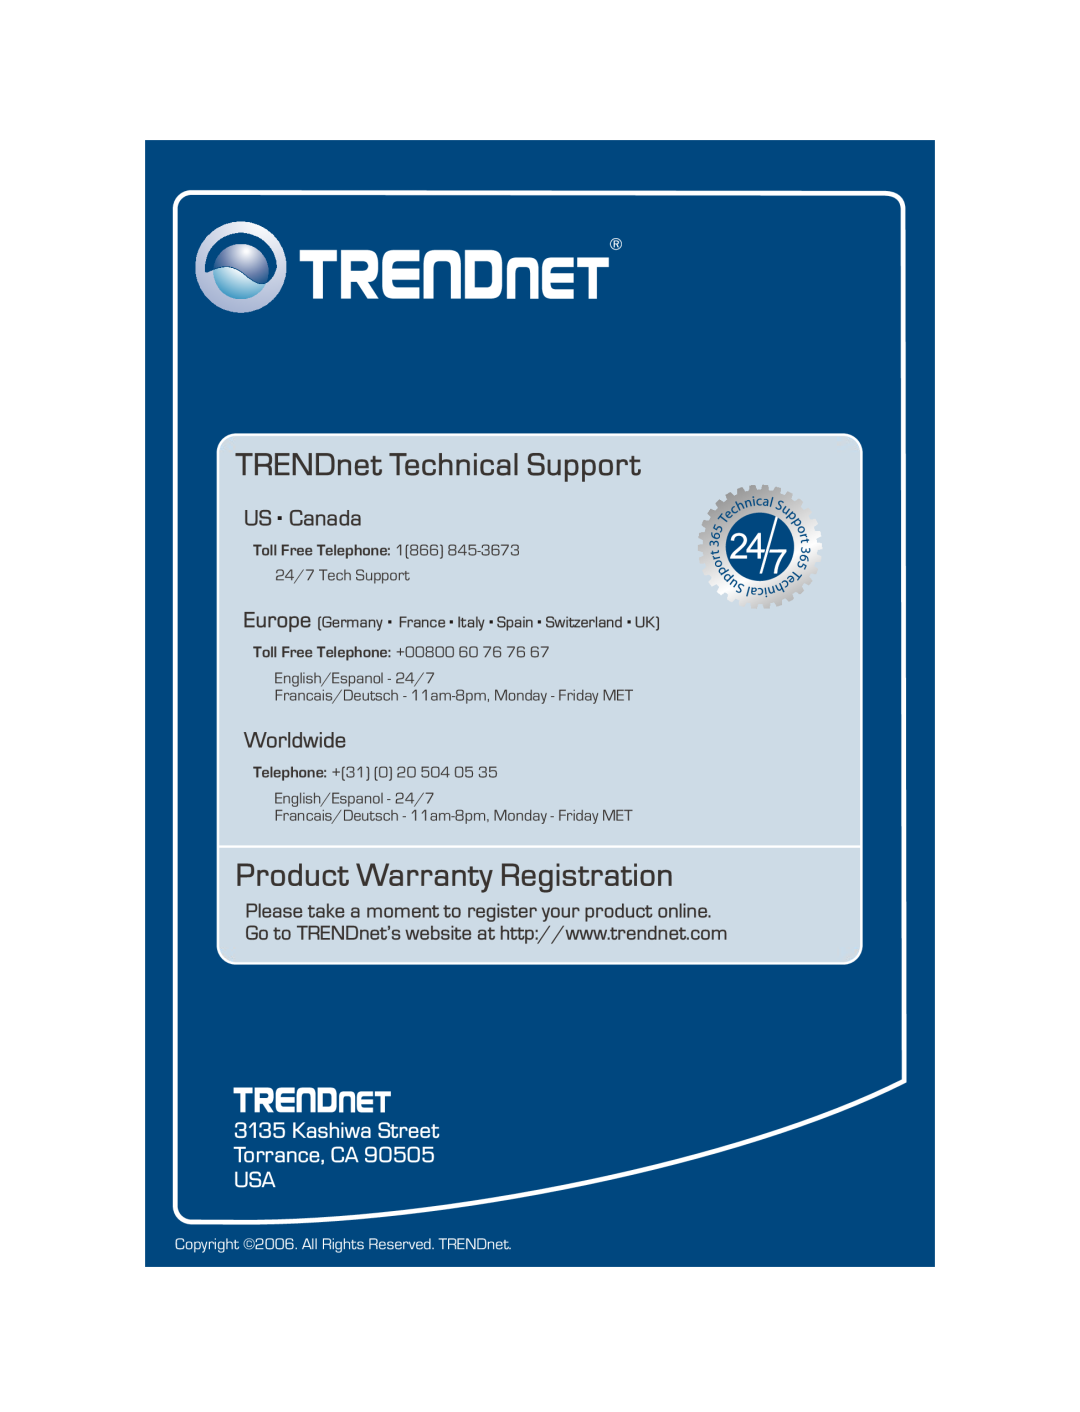 TRENDnet TEG-224WS TRENDnet Technical Support, Product Warranty Registration, US . Canada, Worldwide, Toll Free Telephone 